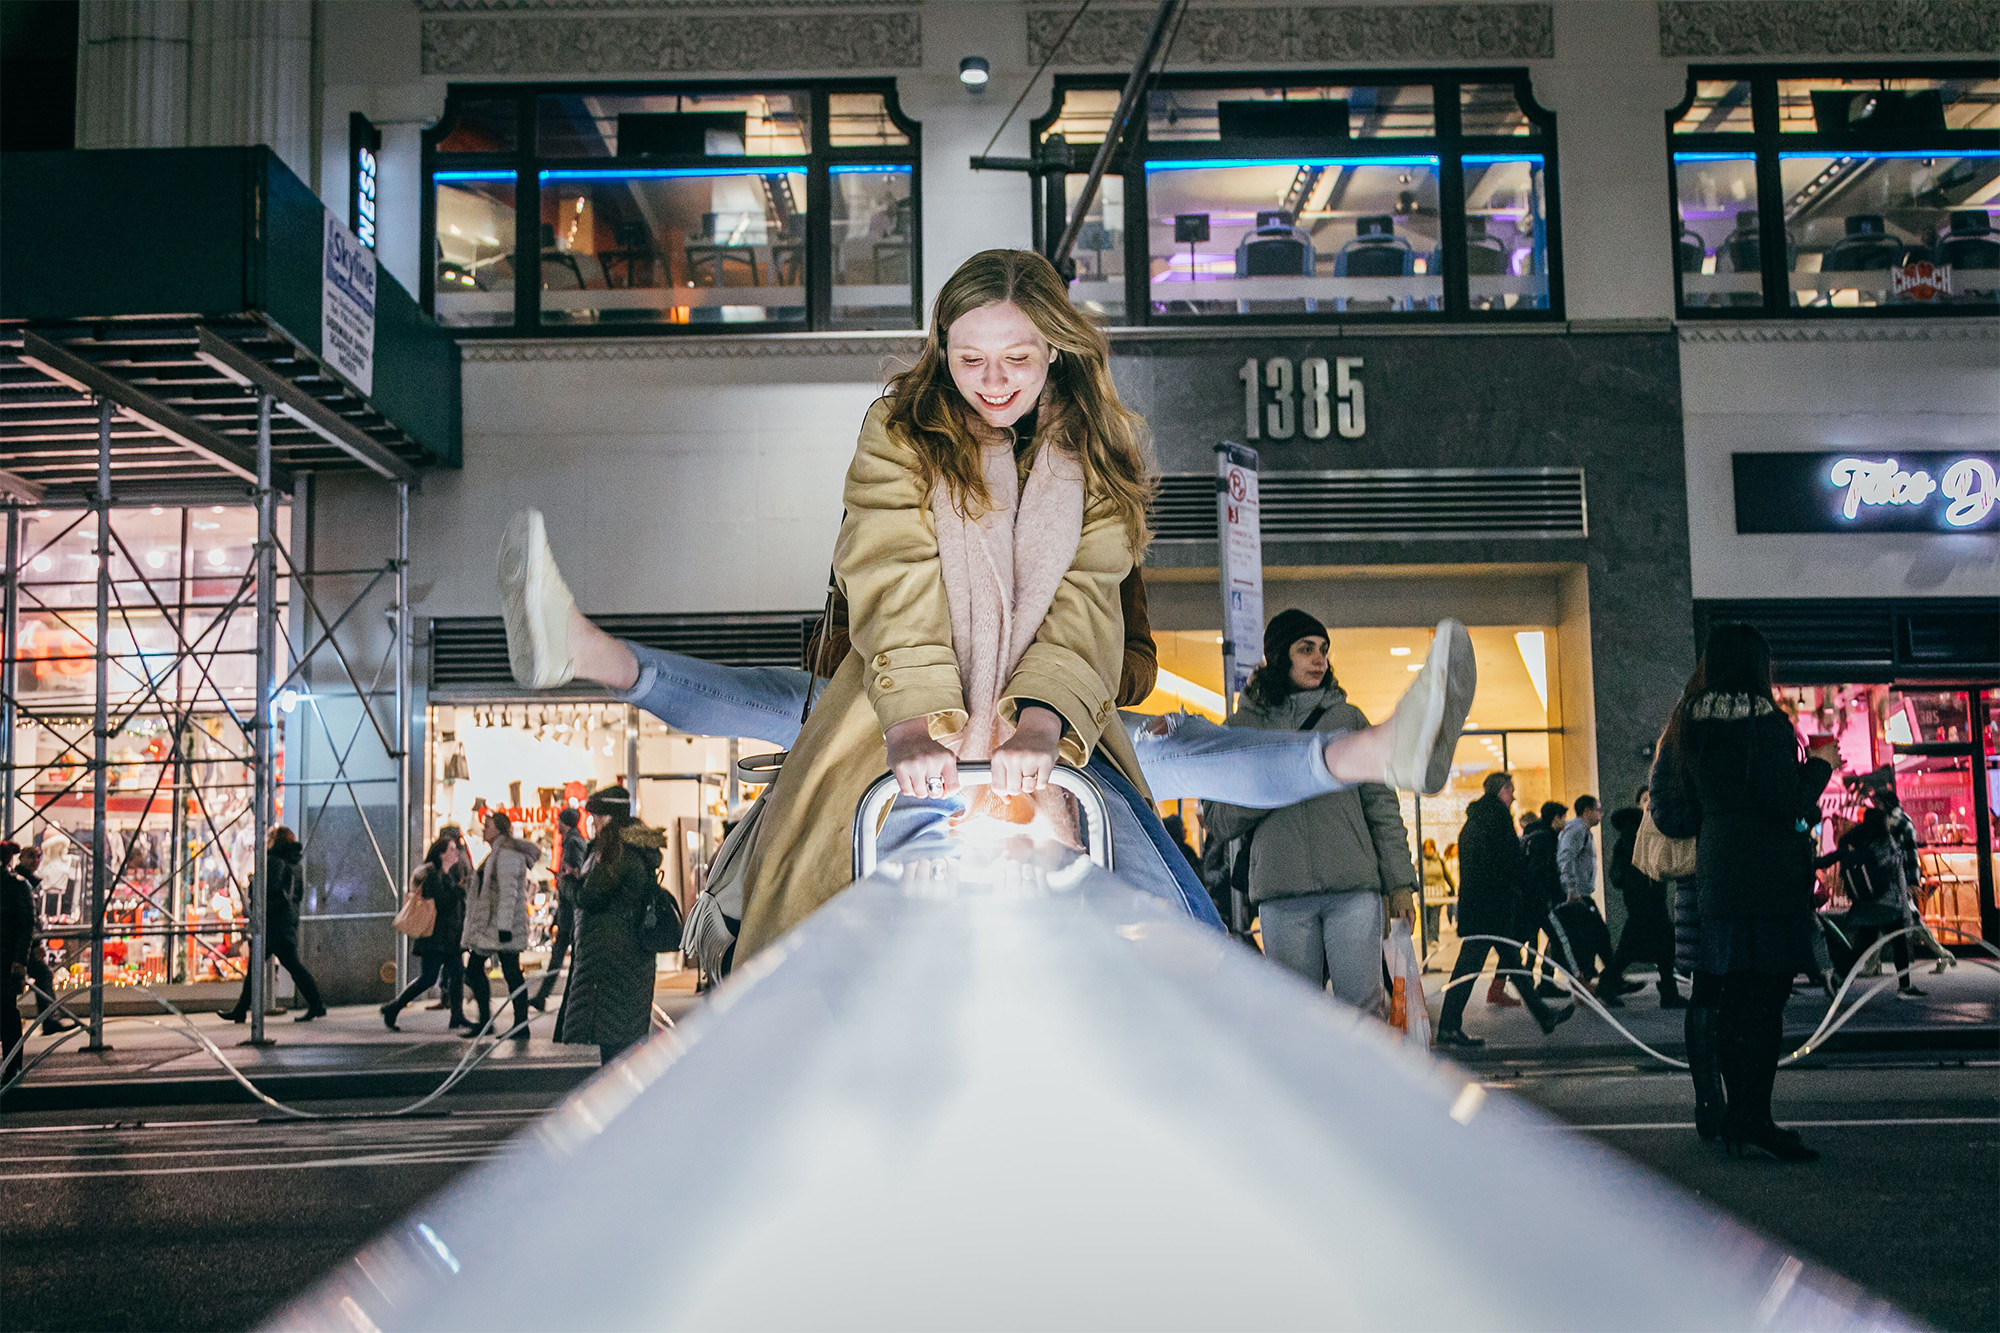 Giant Seesaws Transform New York City’s Garment District into Light-Filled Urban Playground